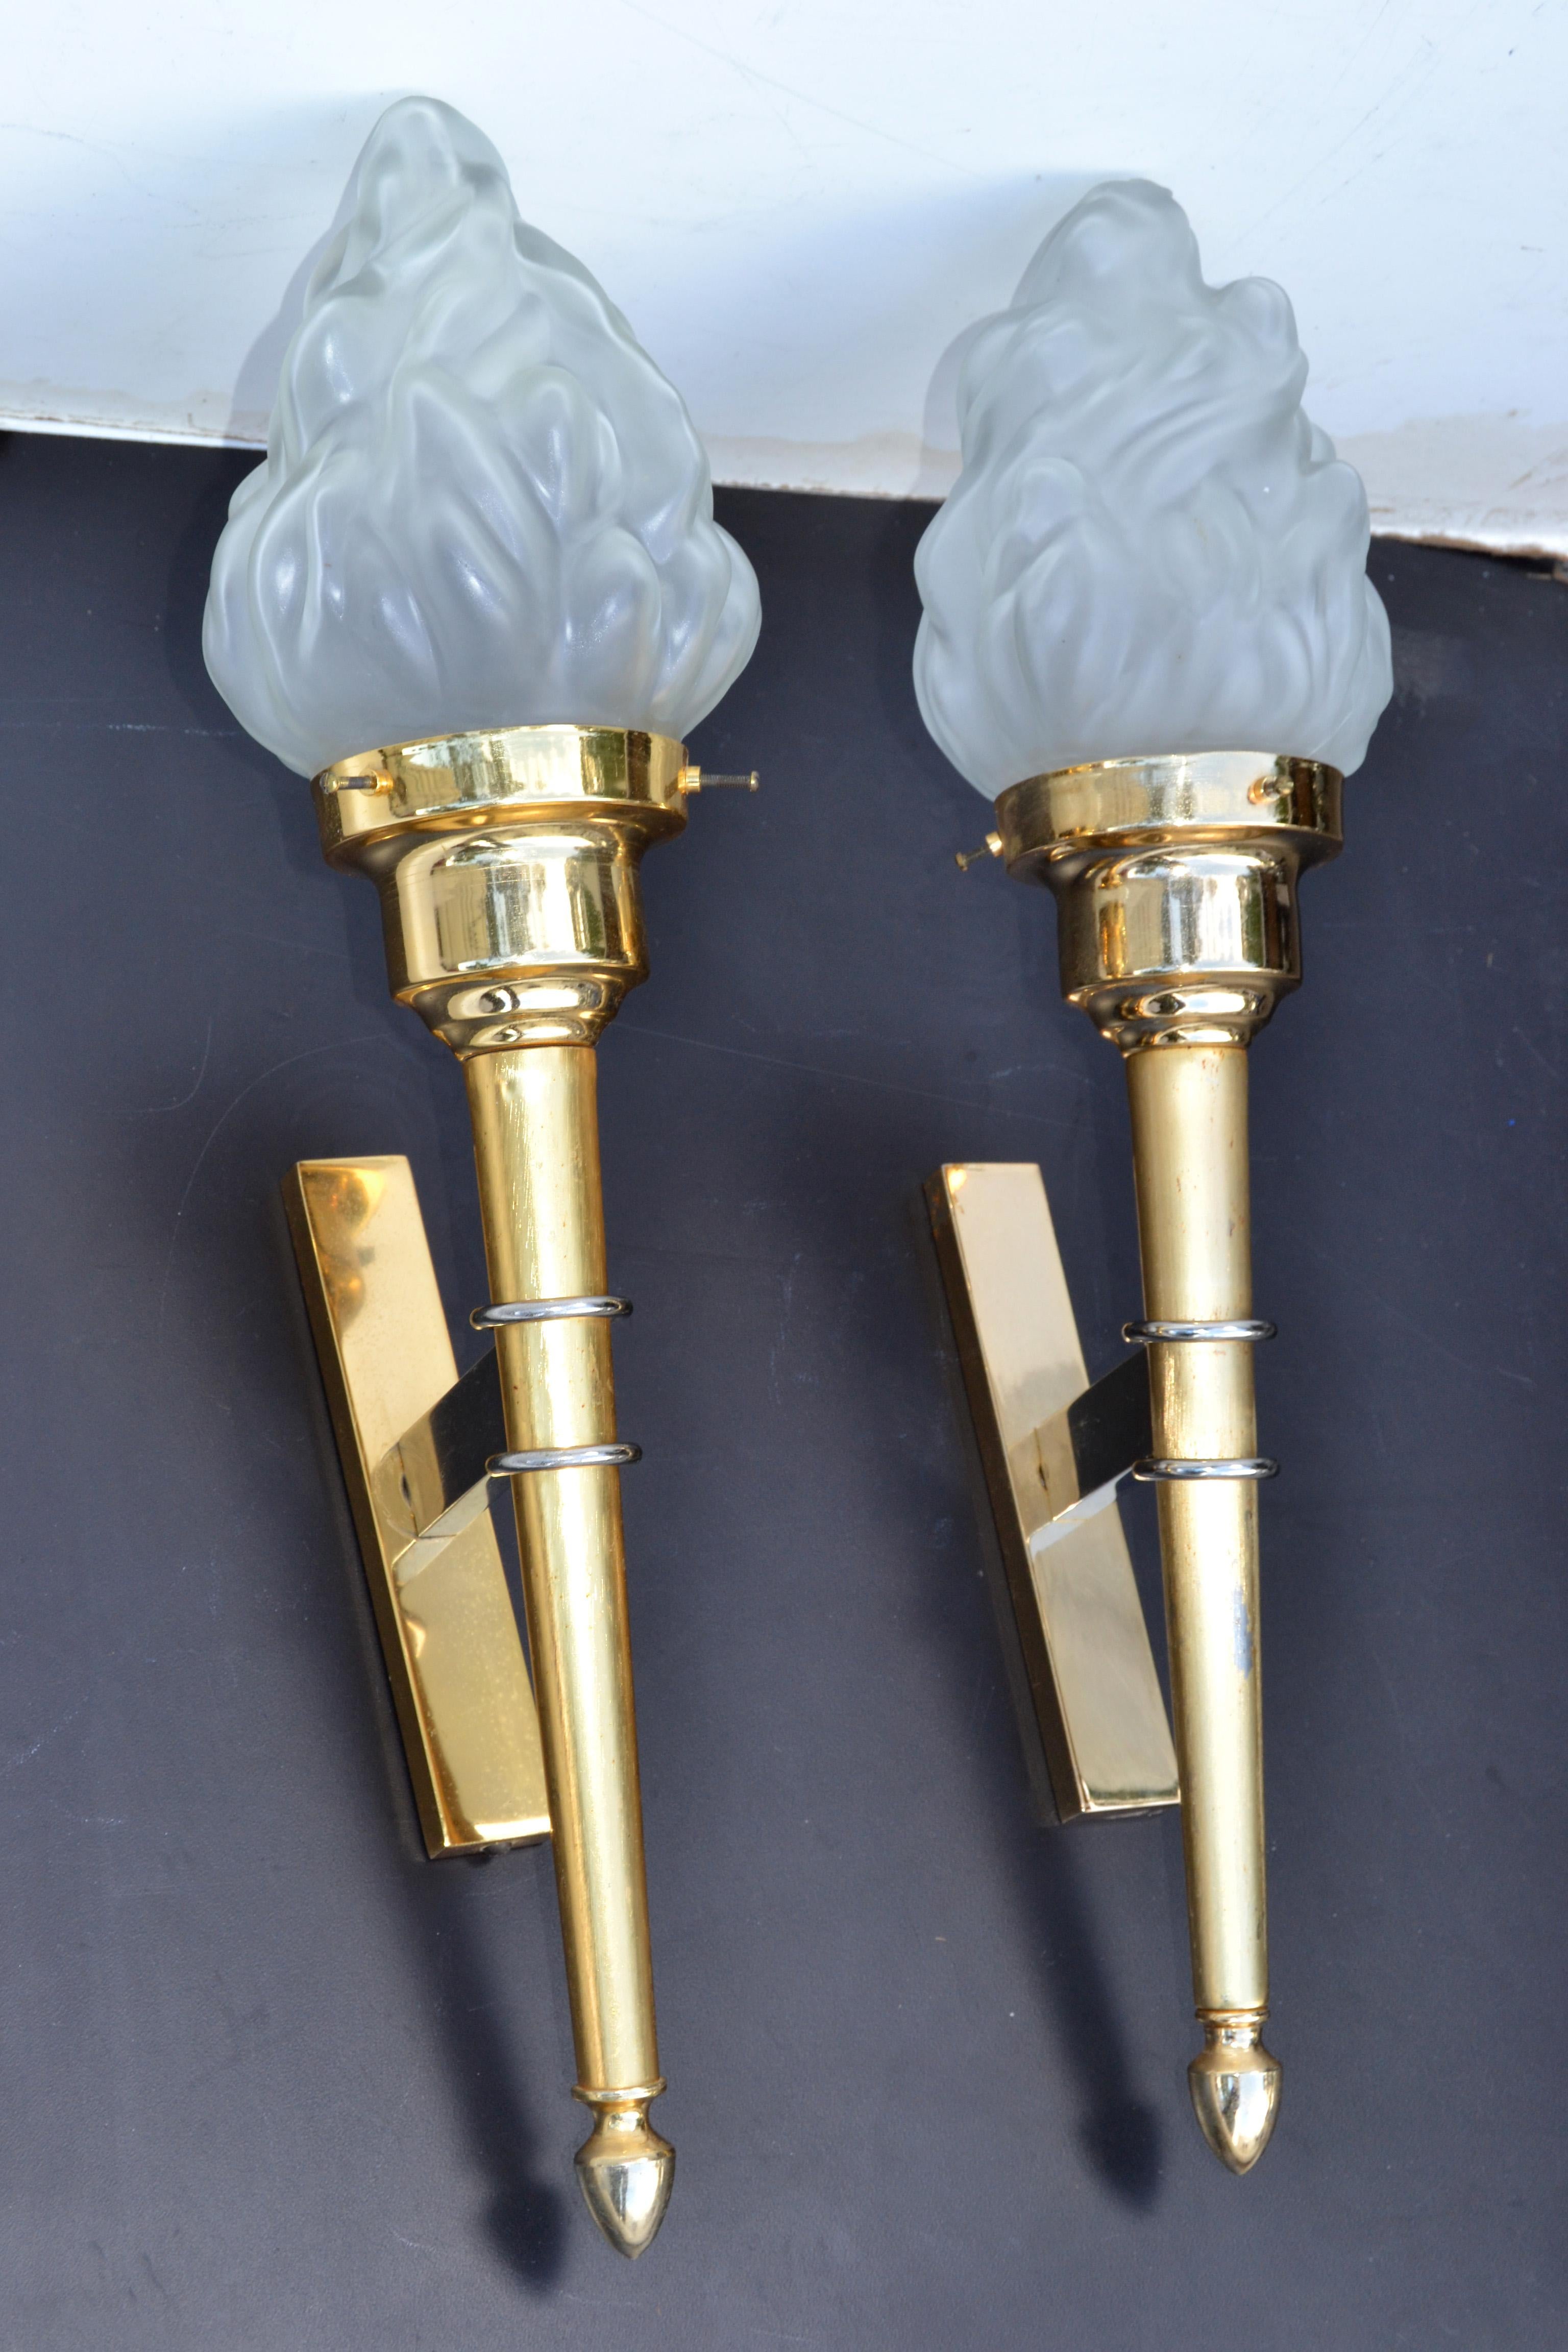 Neoclassical Maison Jansen Style Sconces Brass & Blown Glass Flame Shade France 1950, Pair For Sale